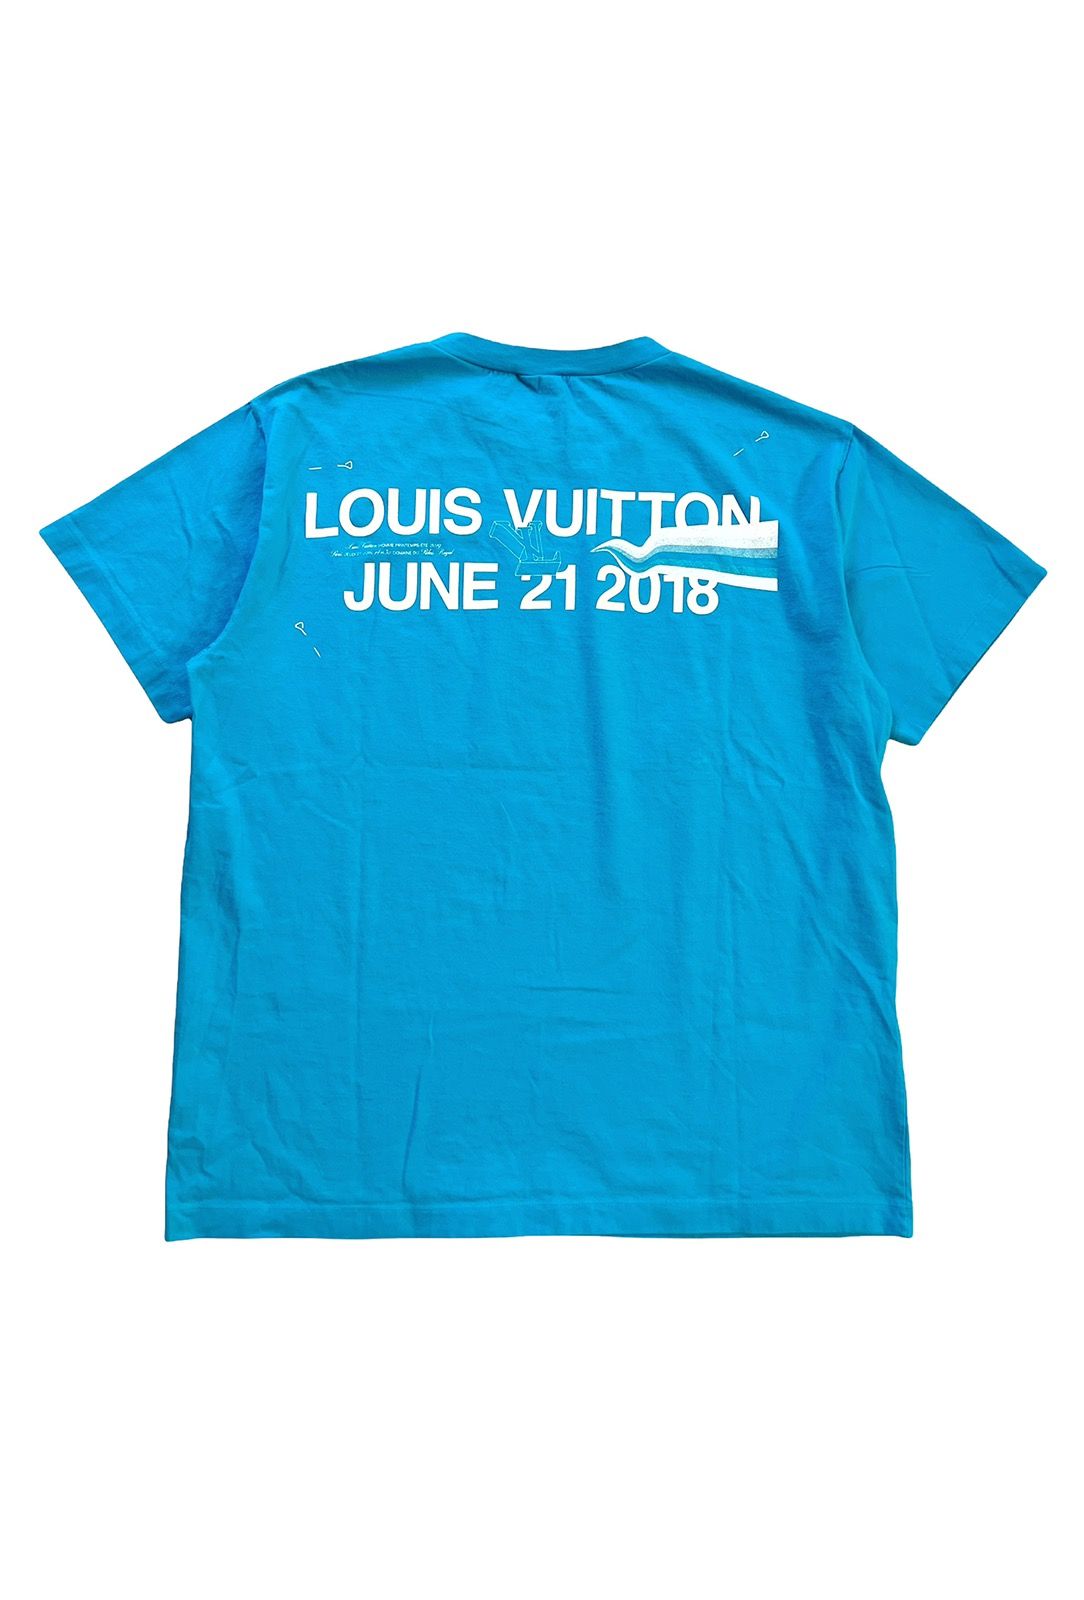 Louis Vuitton SS18 Friends/Family Exclusive Not Home Tee Virgil